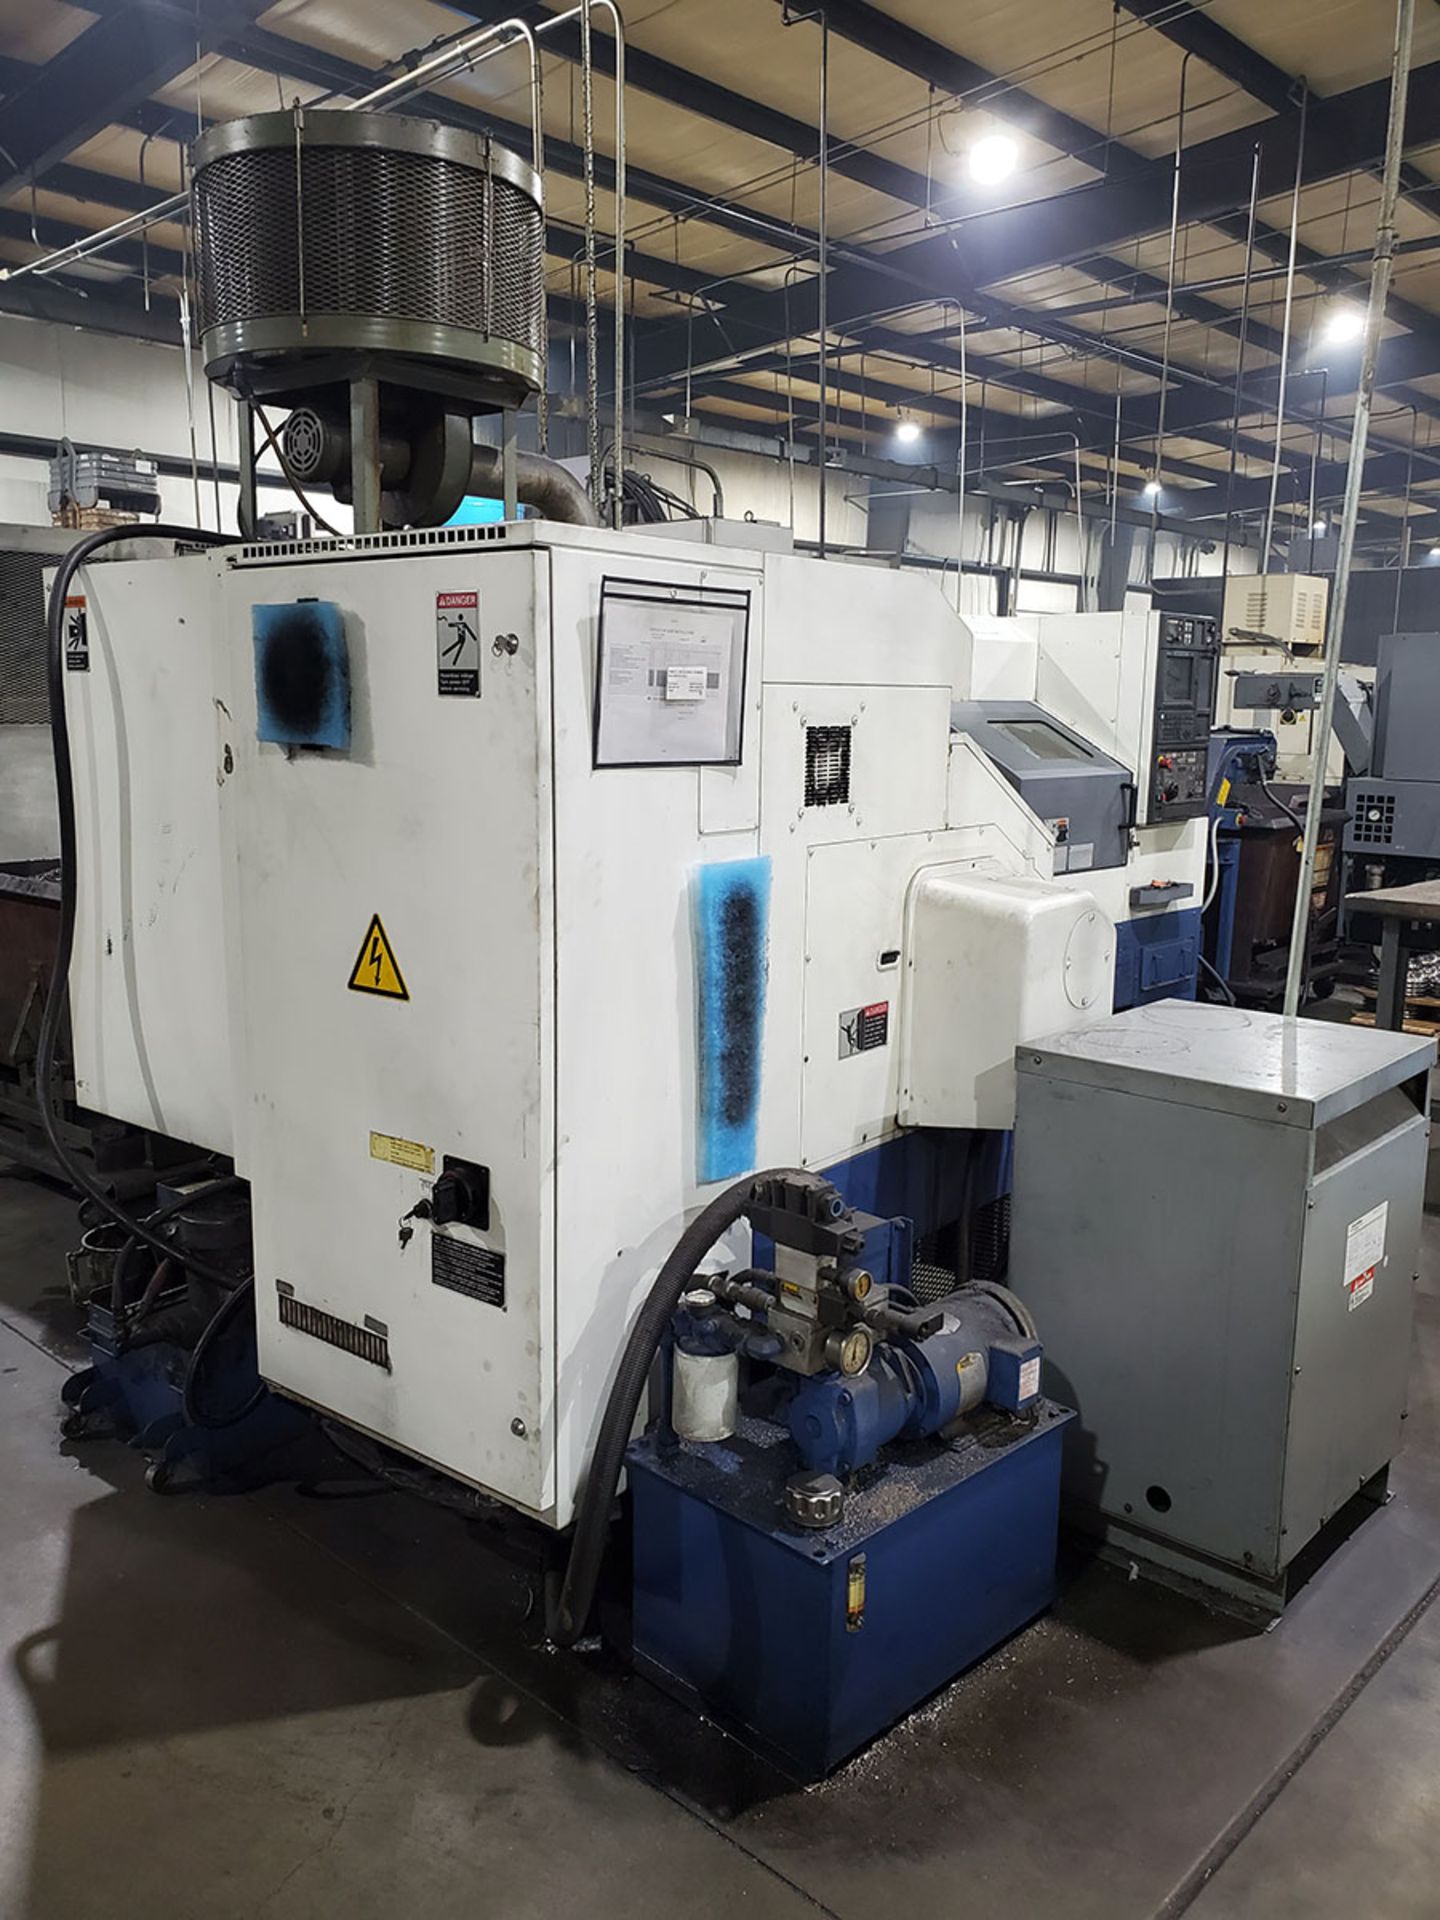 MORI-SEIKI CNC LATHE, MSC-803 DRO CNC CONTROL, MIST COLLECTOR, TURBO OUTFEED INCLINE CHIP - Image 10 of 16